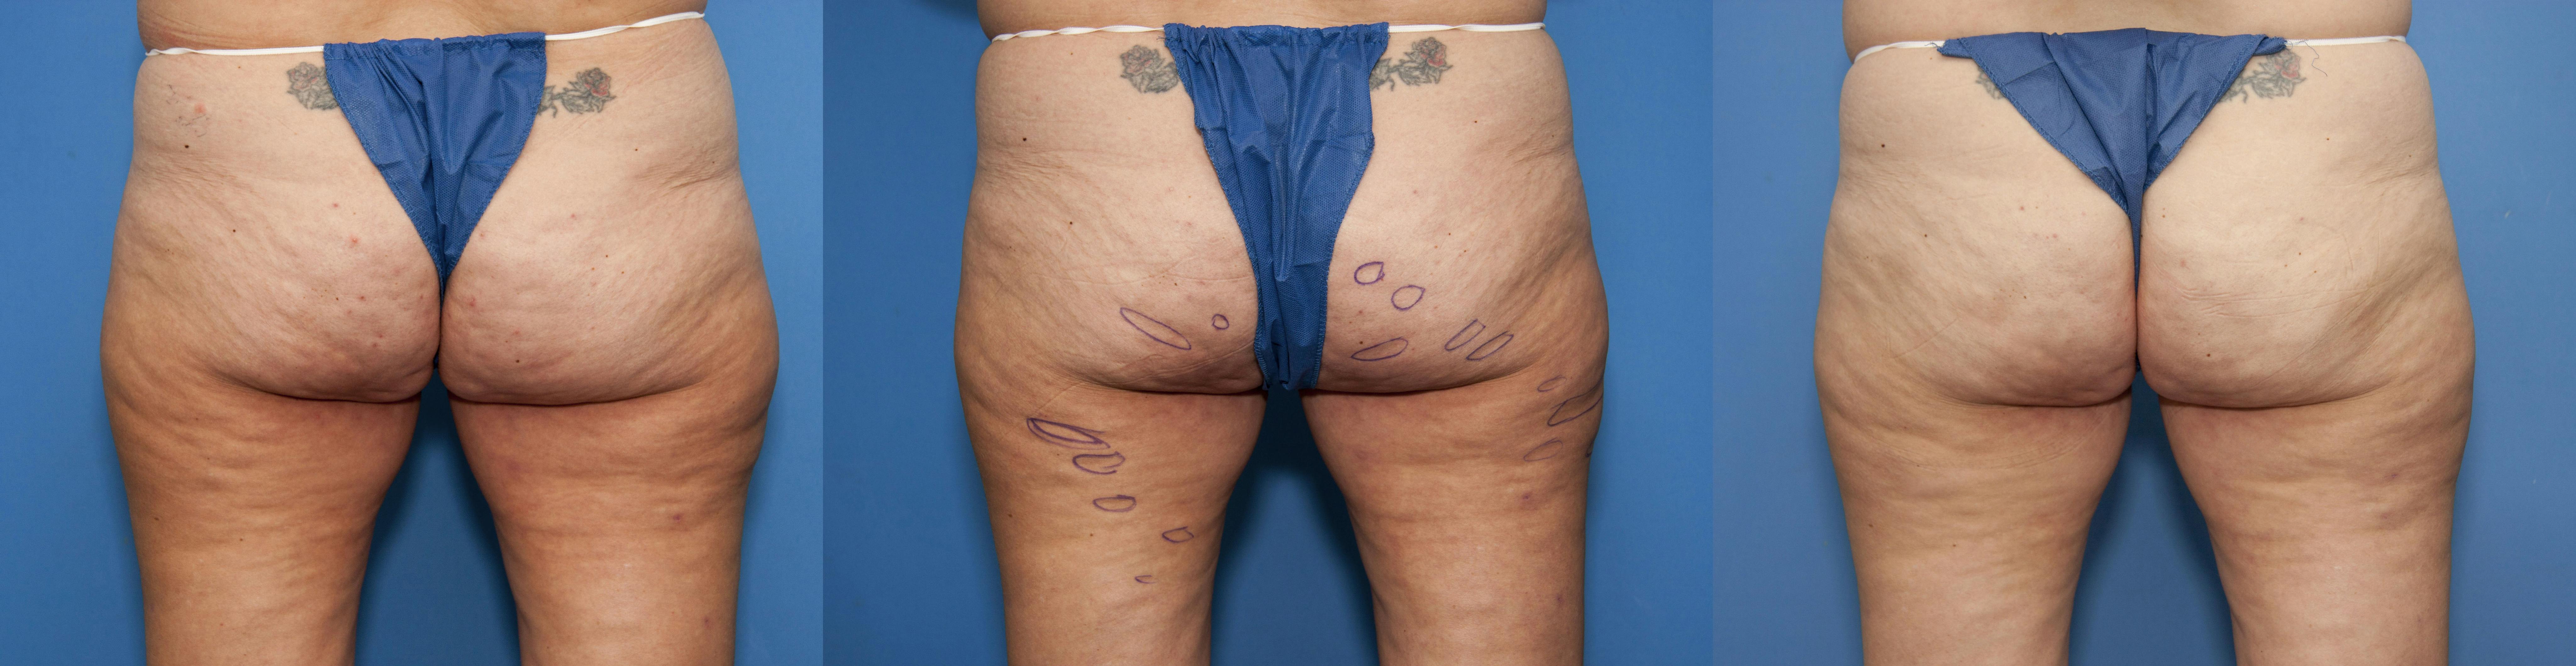 Aveli Before & After Gallery - Patient 113073 - Image 3